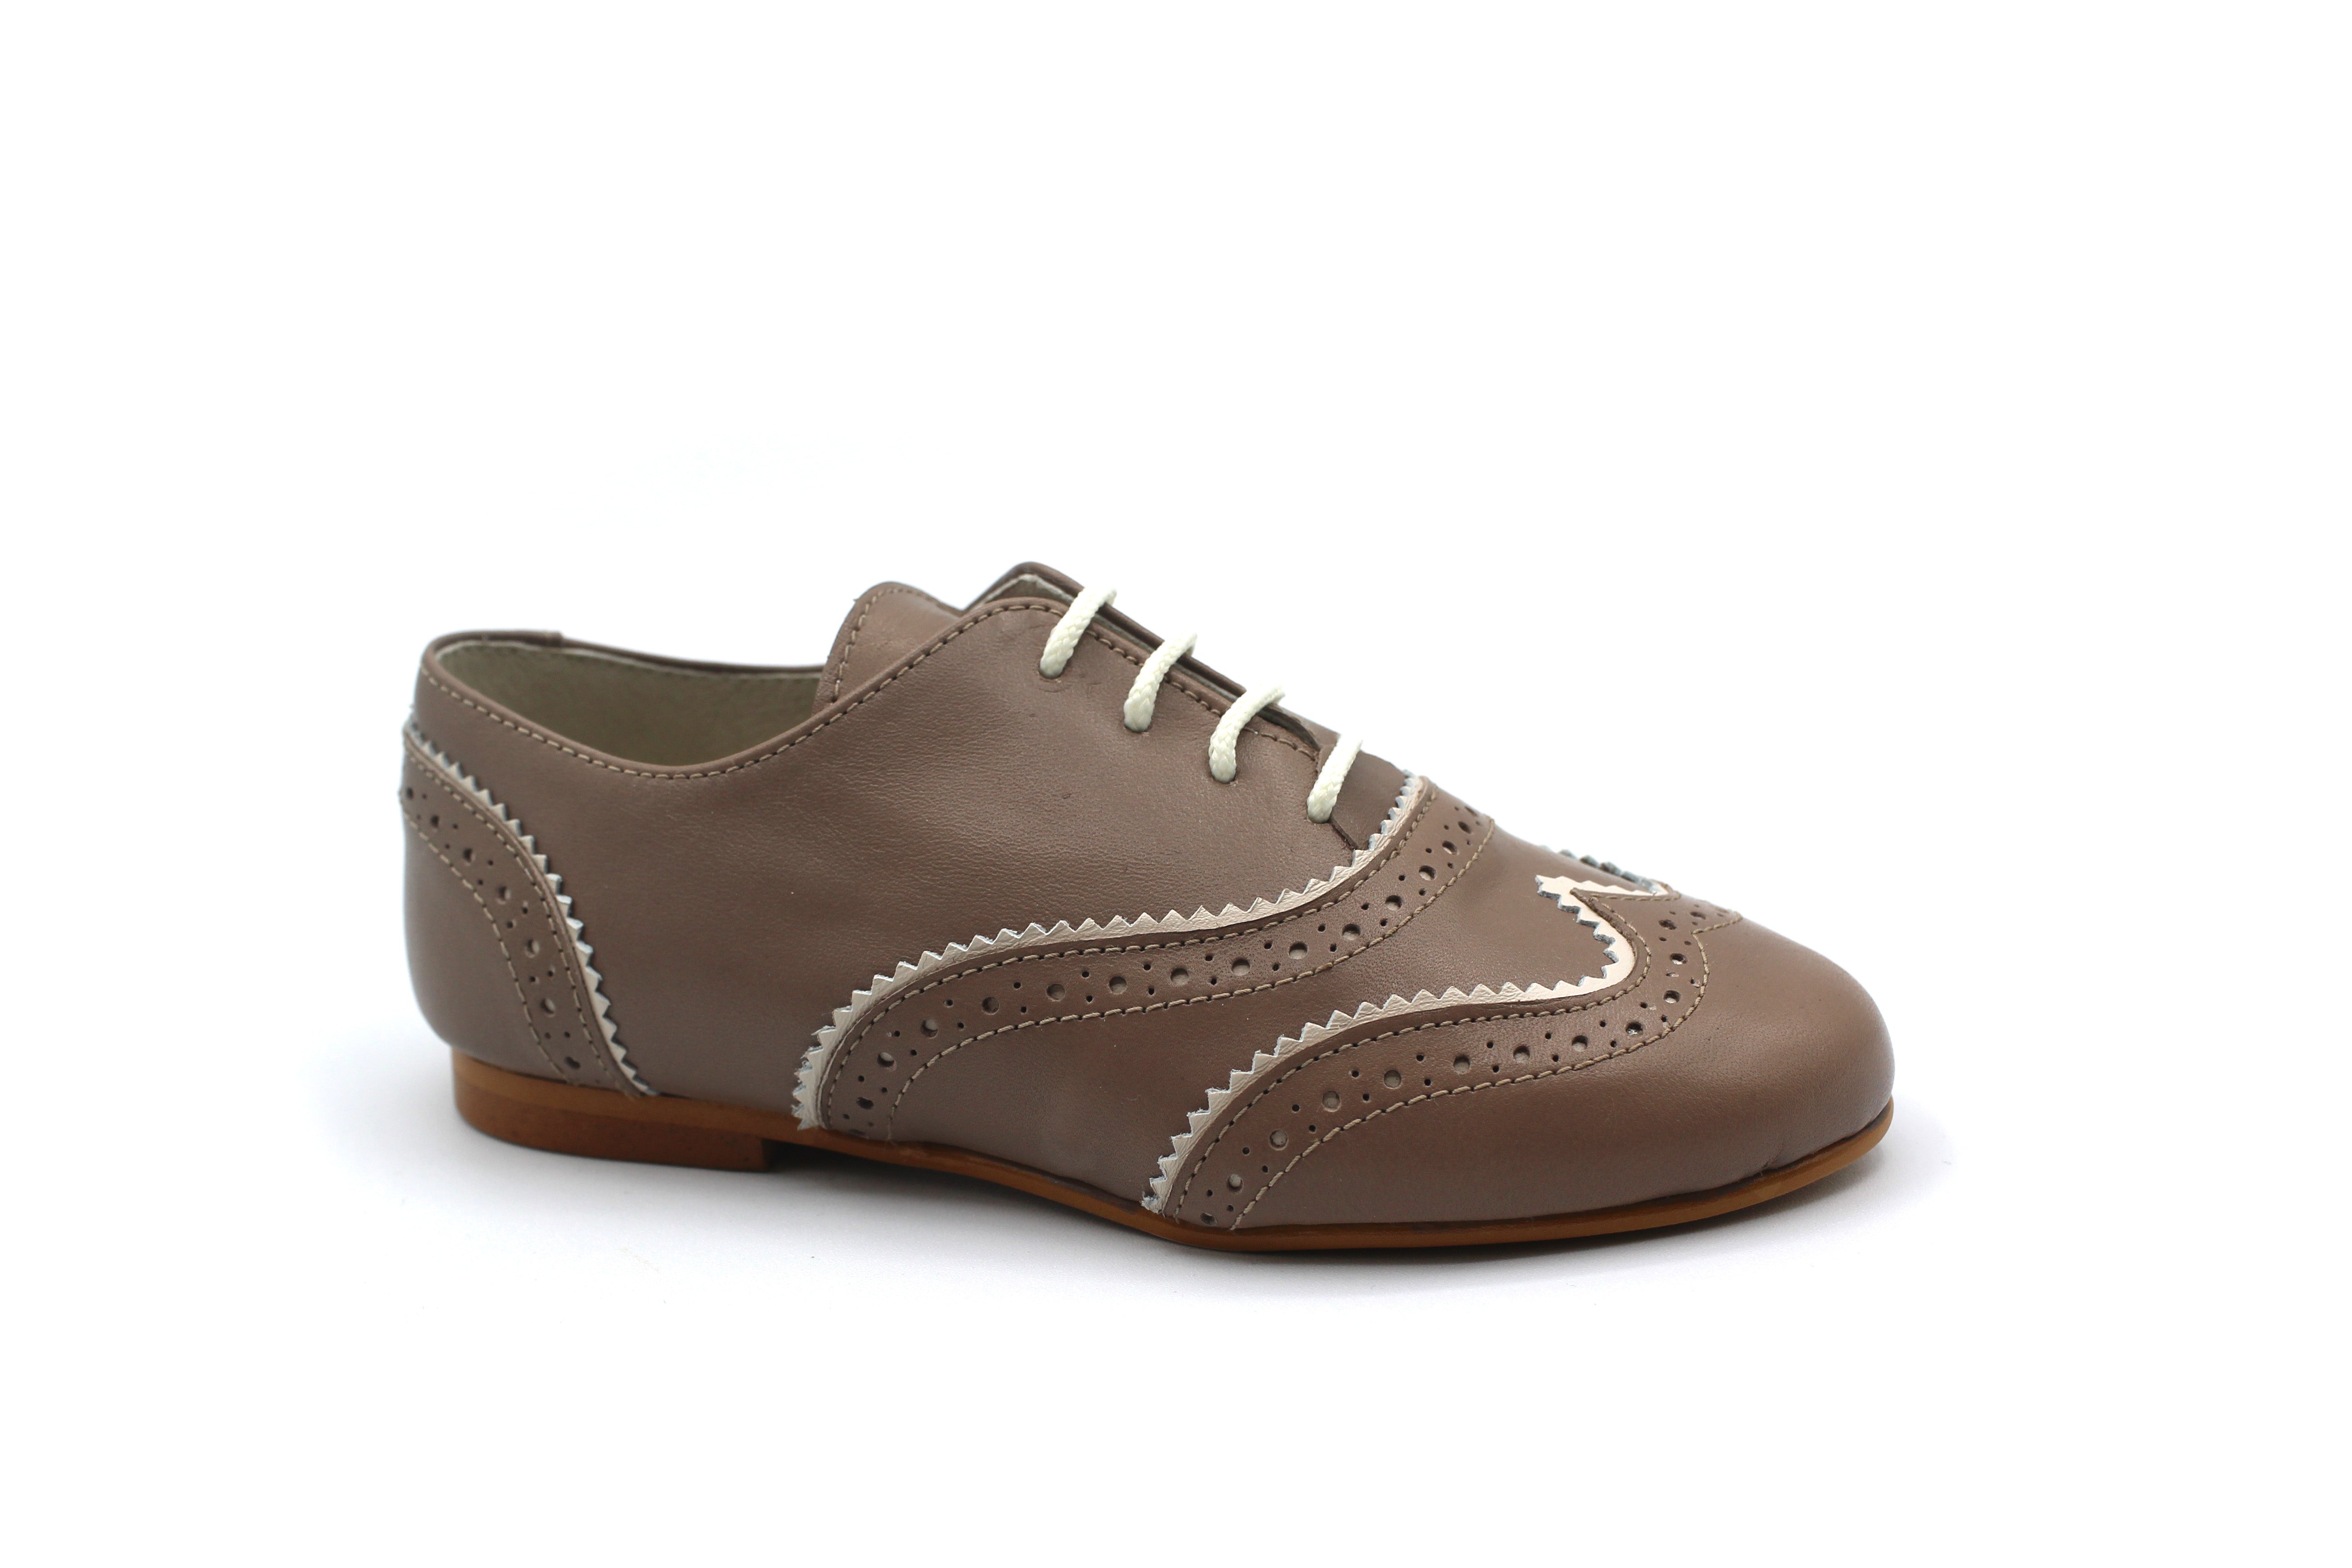 Sonatina Imperial Taupe Oxford